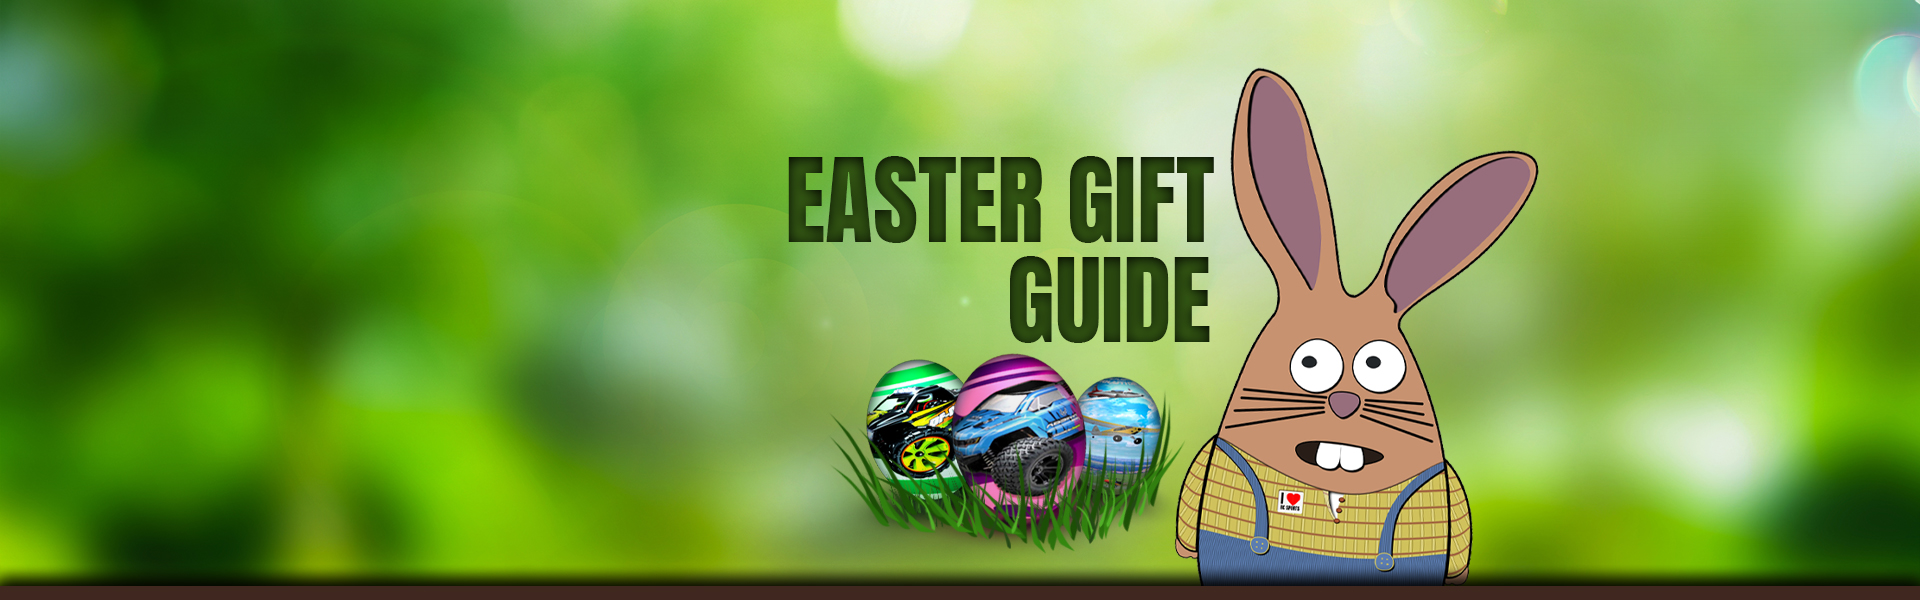 Easter Gift Guide RC Car RC Plane 